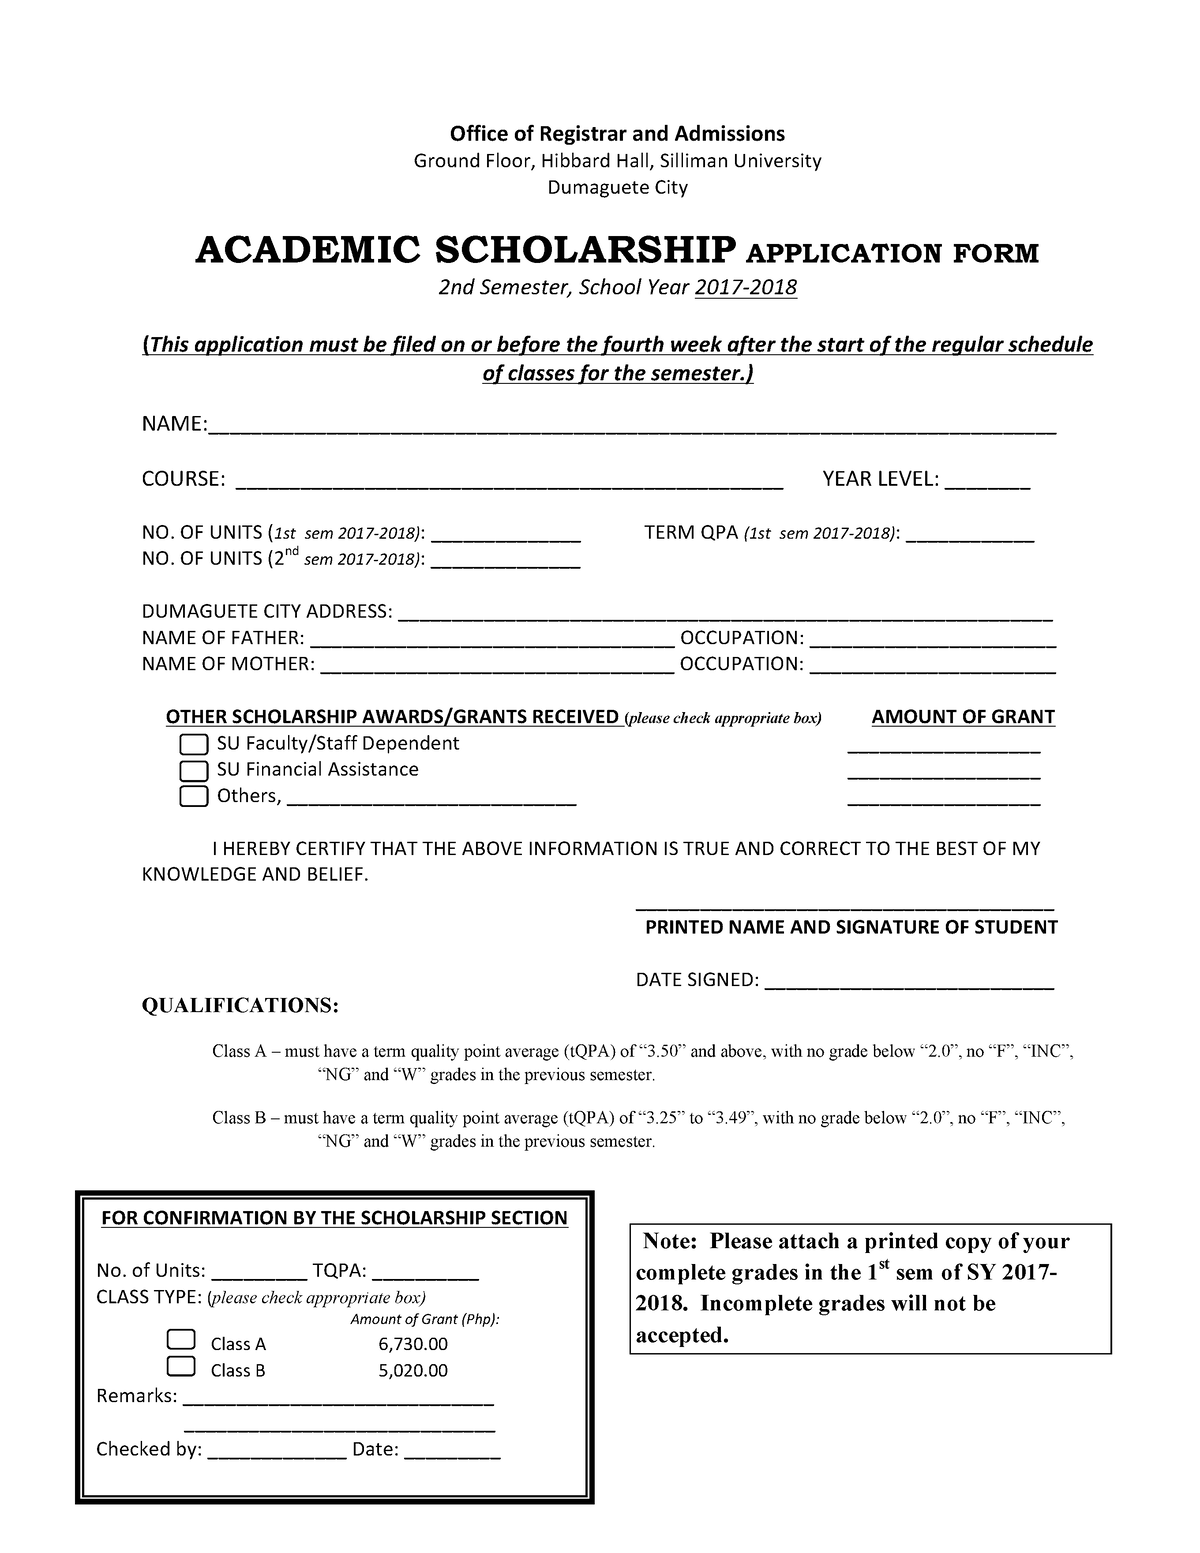 Scholarship appform 1718 - Office of Registrar and Admissions Ground ...